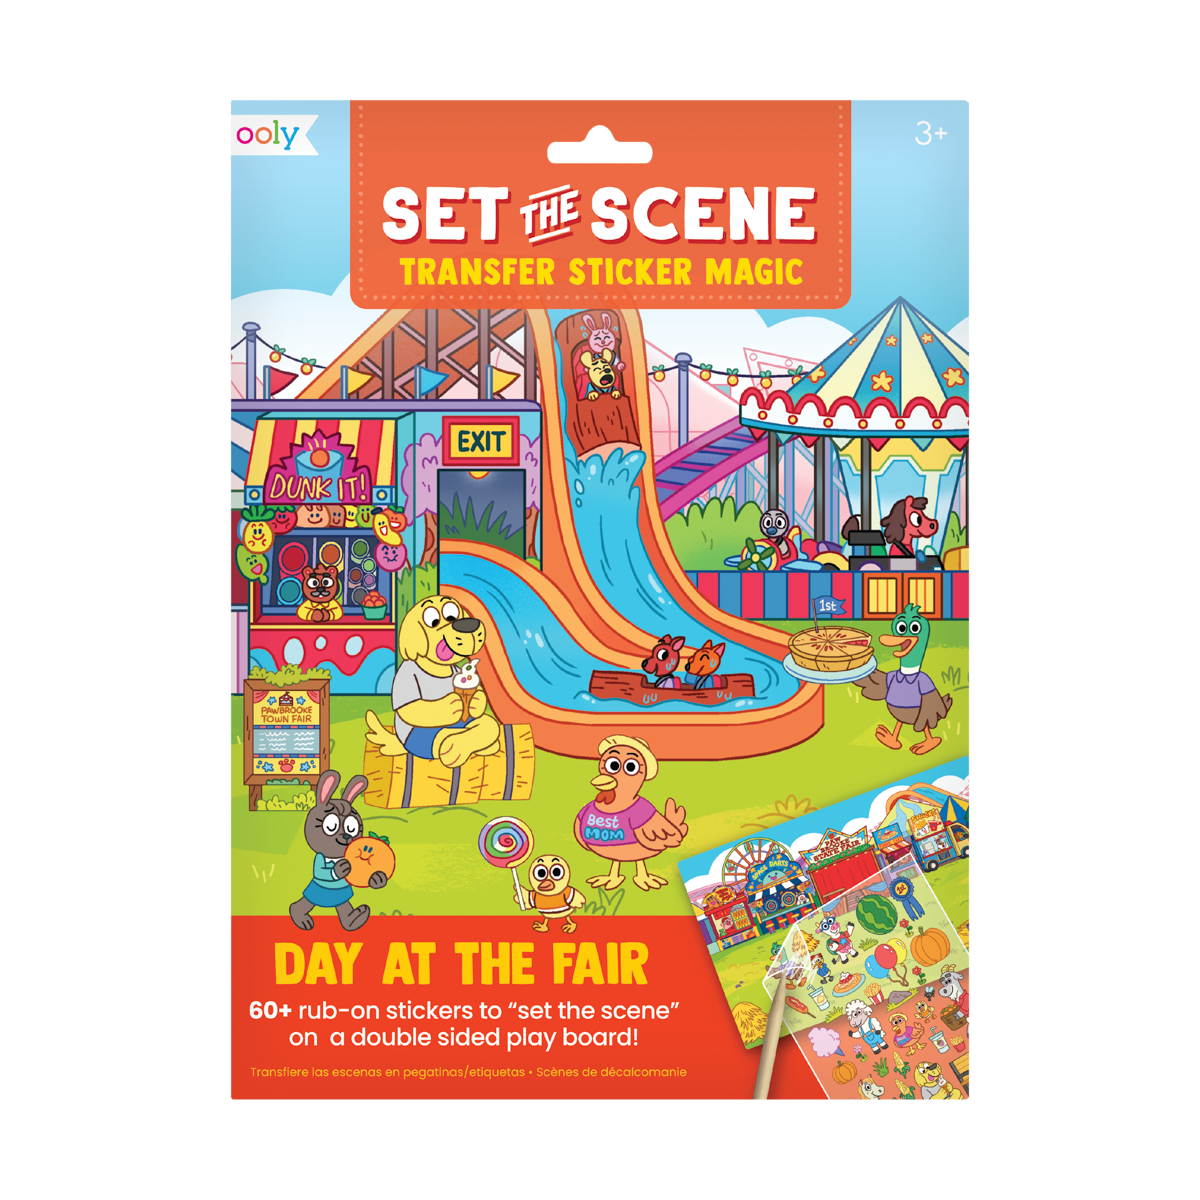 OOLY Set The Scene Transfer Stickers Magic - Day At The Fair in packaging